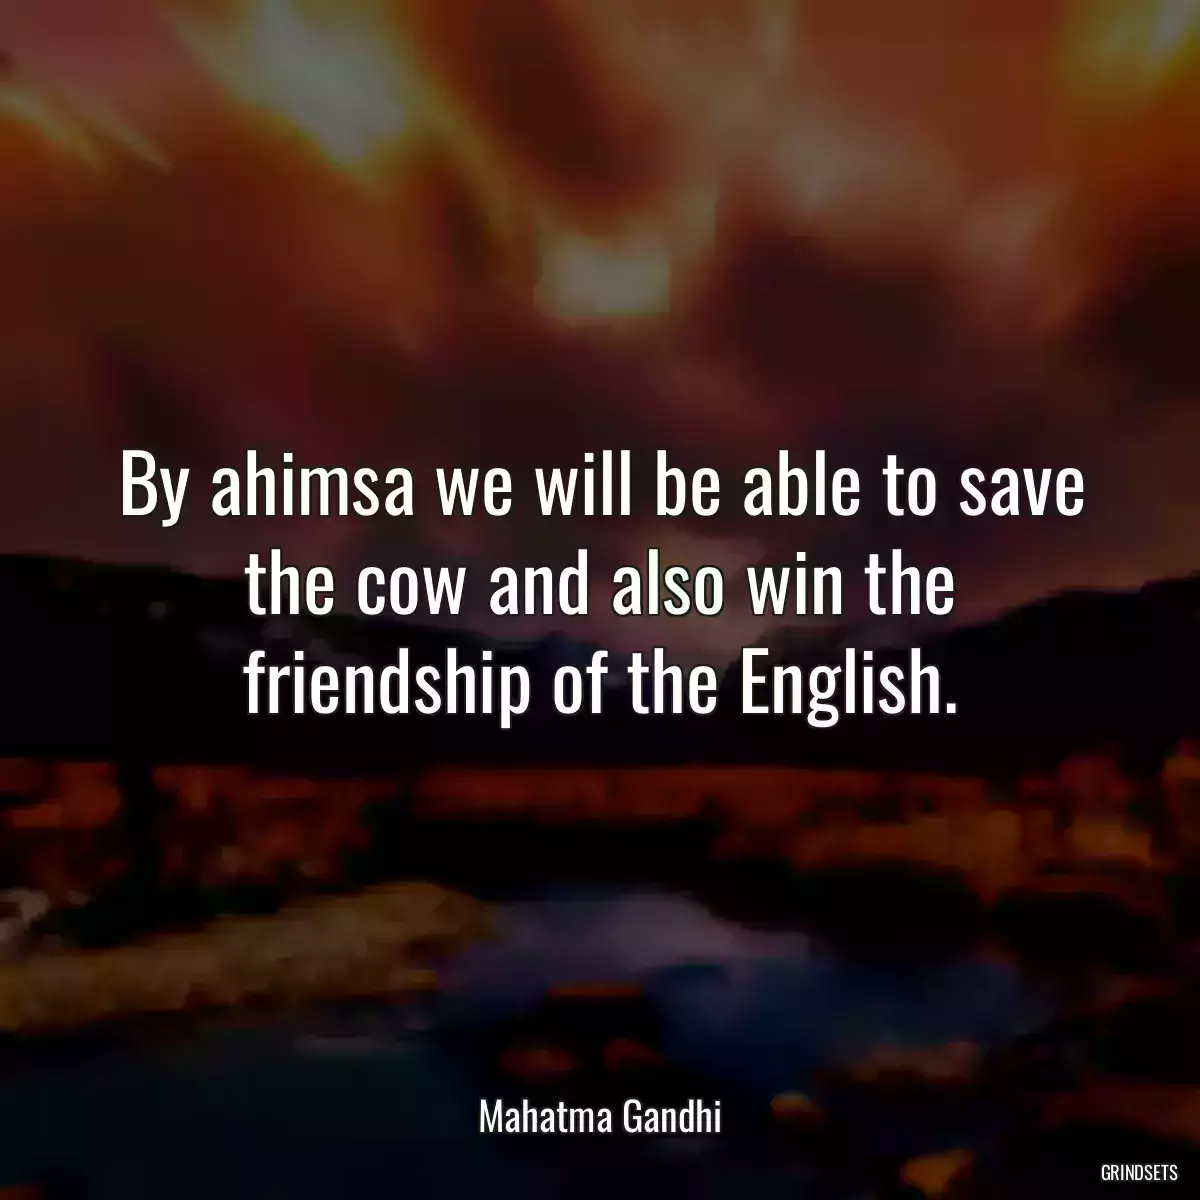 By ahimsa we will be able to save the cow and also win the friendship of the English.